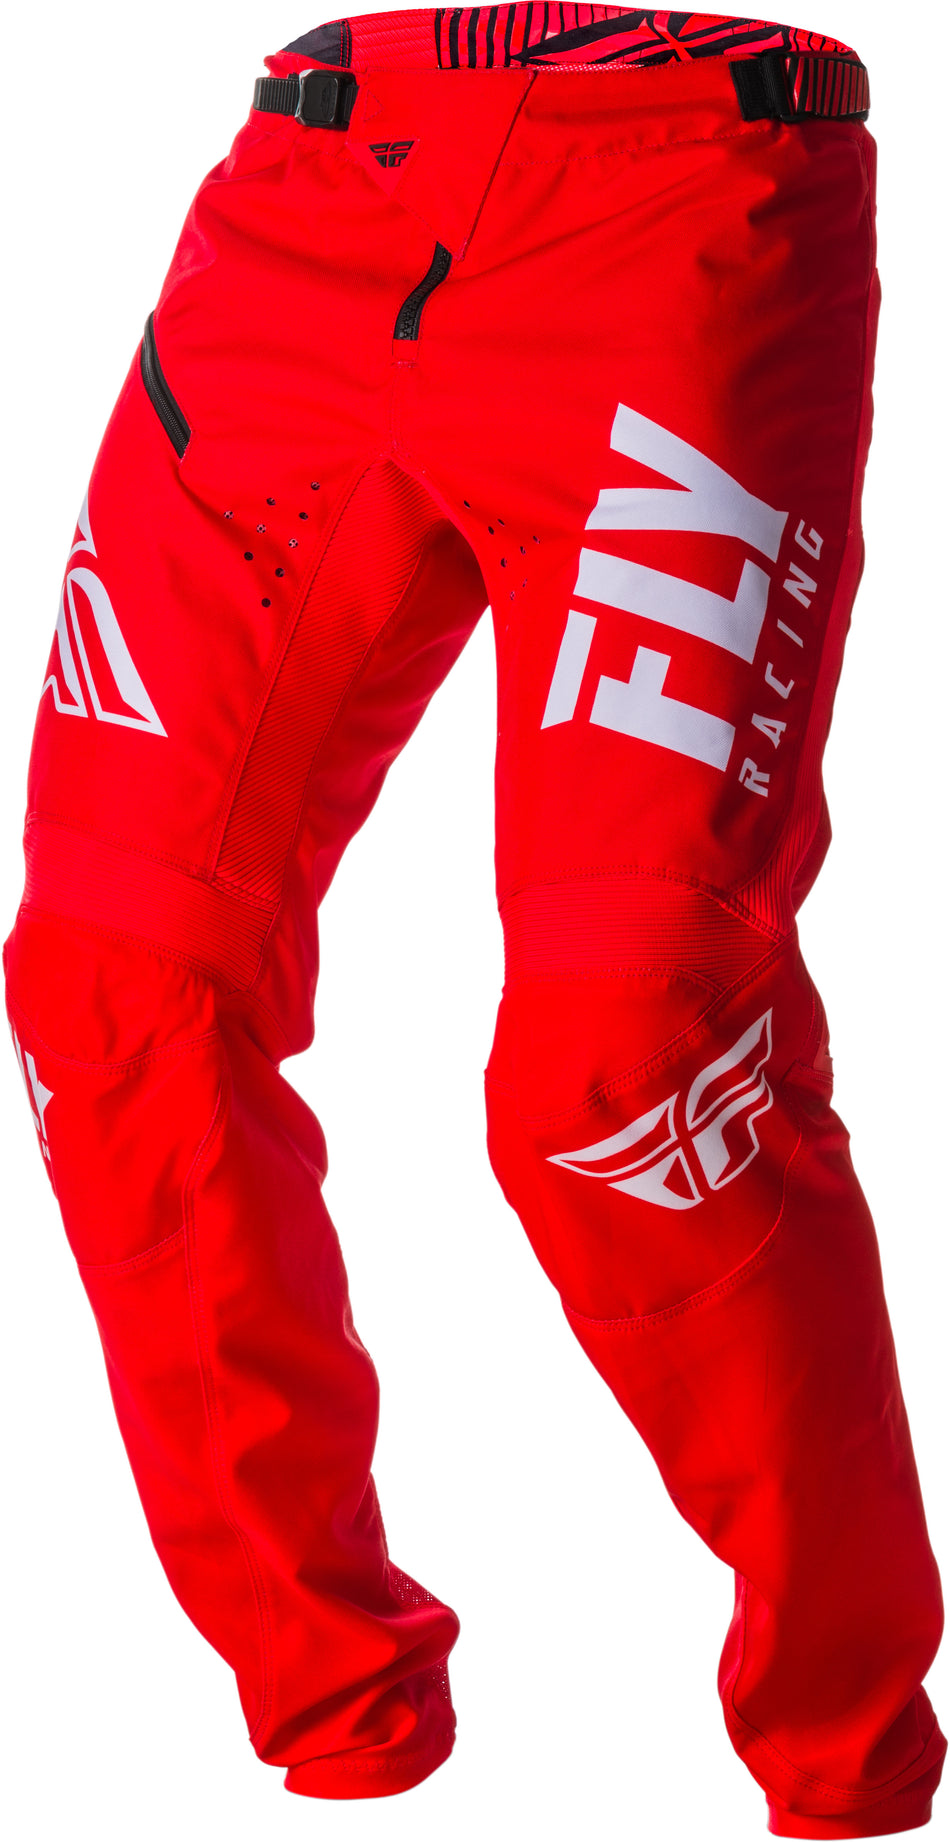 FLY RACING Kinetic Shield Bicycle Pants Red/White Sz 20 372-02220